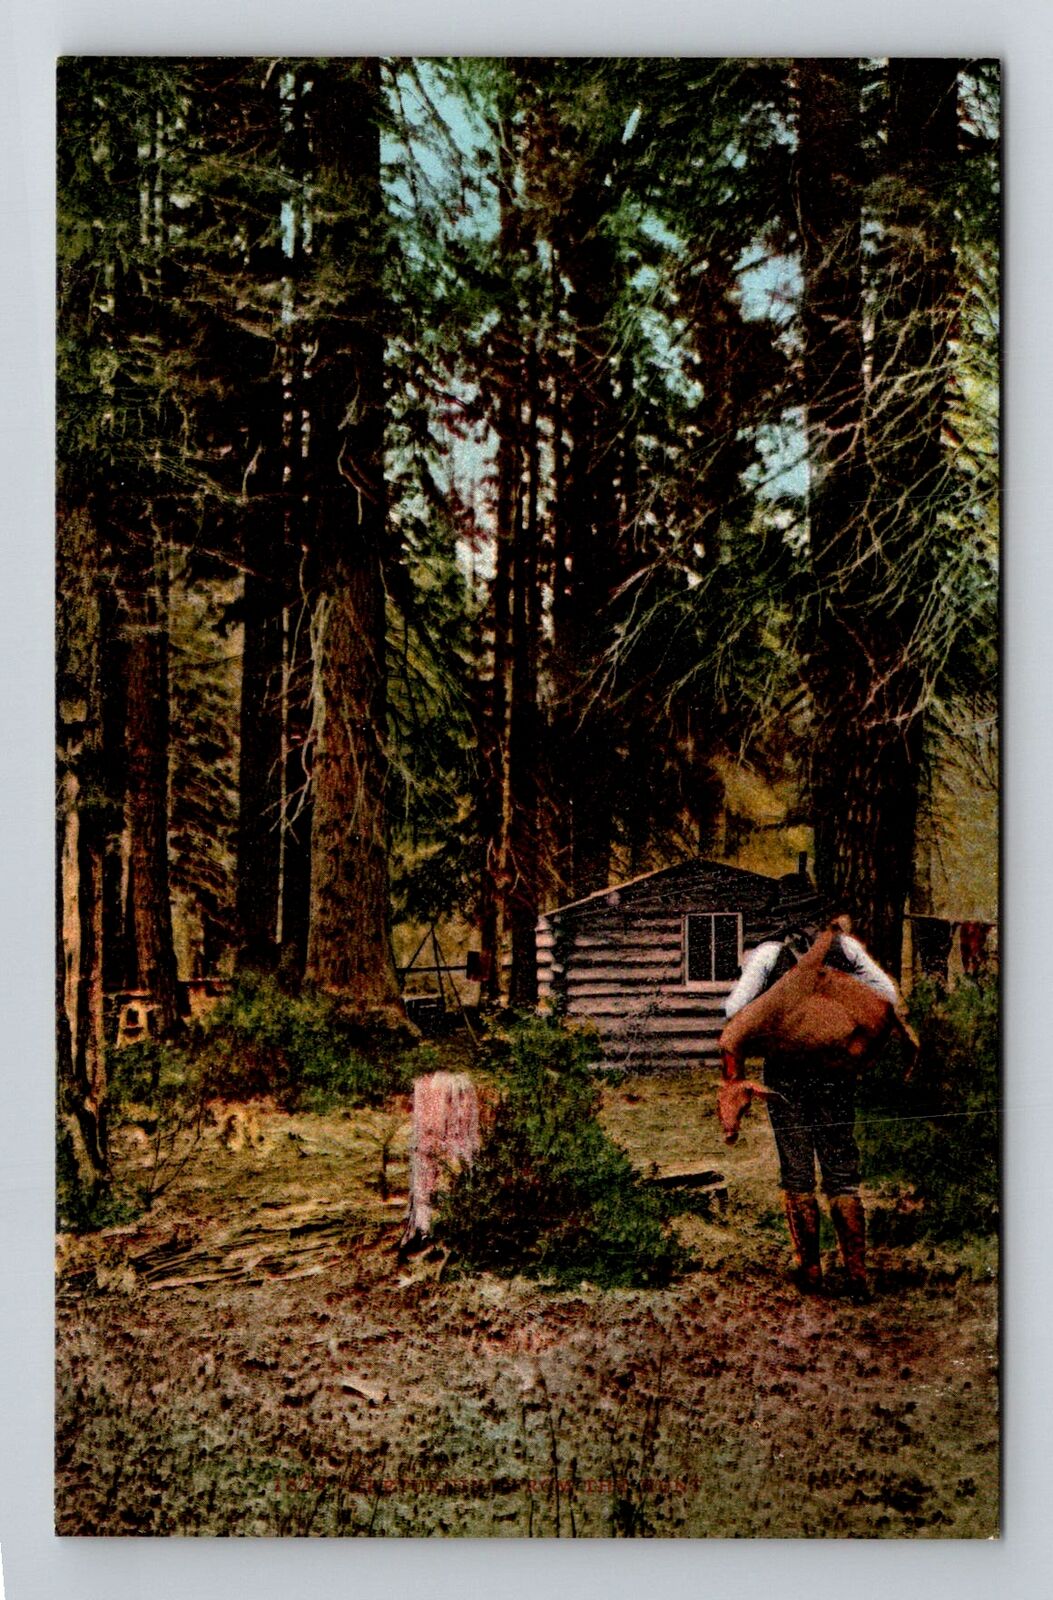 Wilderness Person Out In The Woods, People, Vintage Postcard